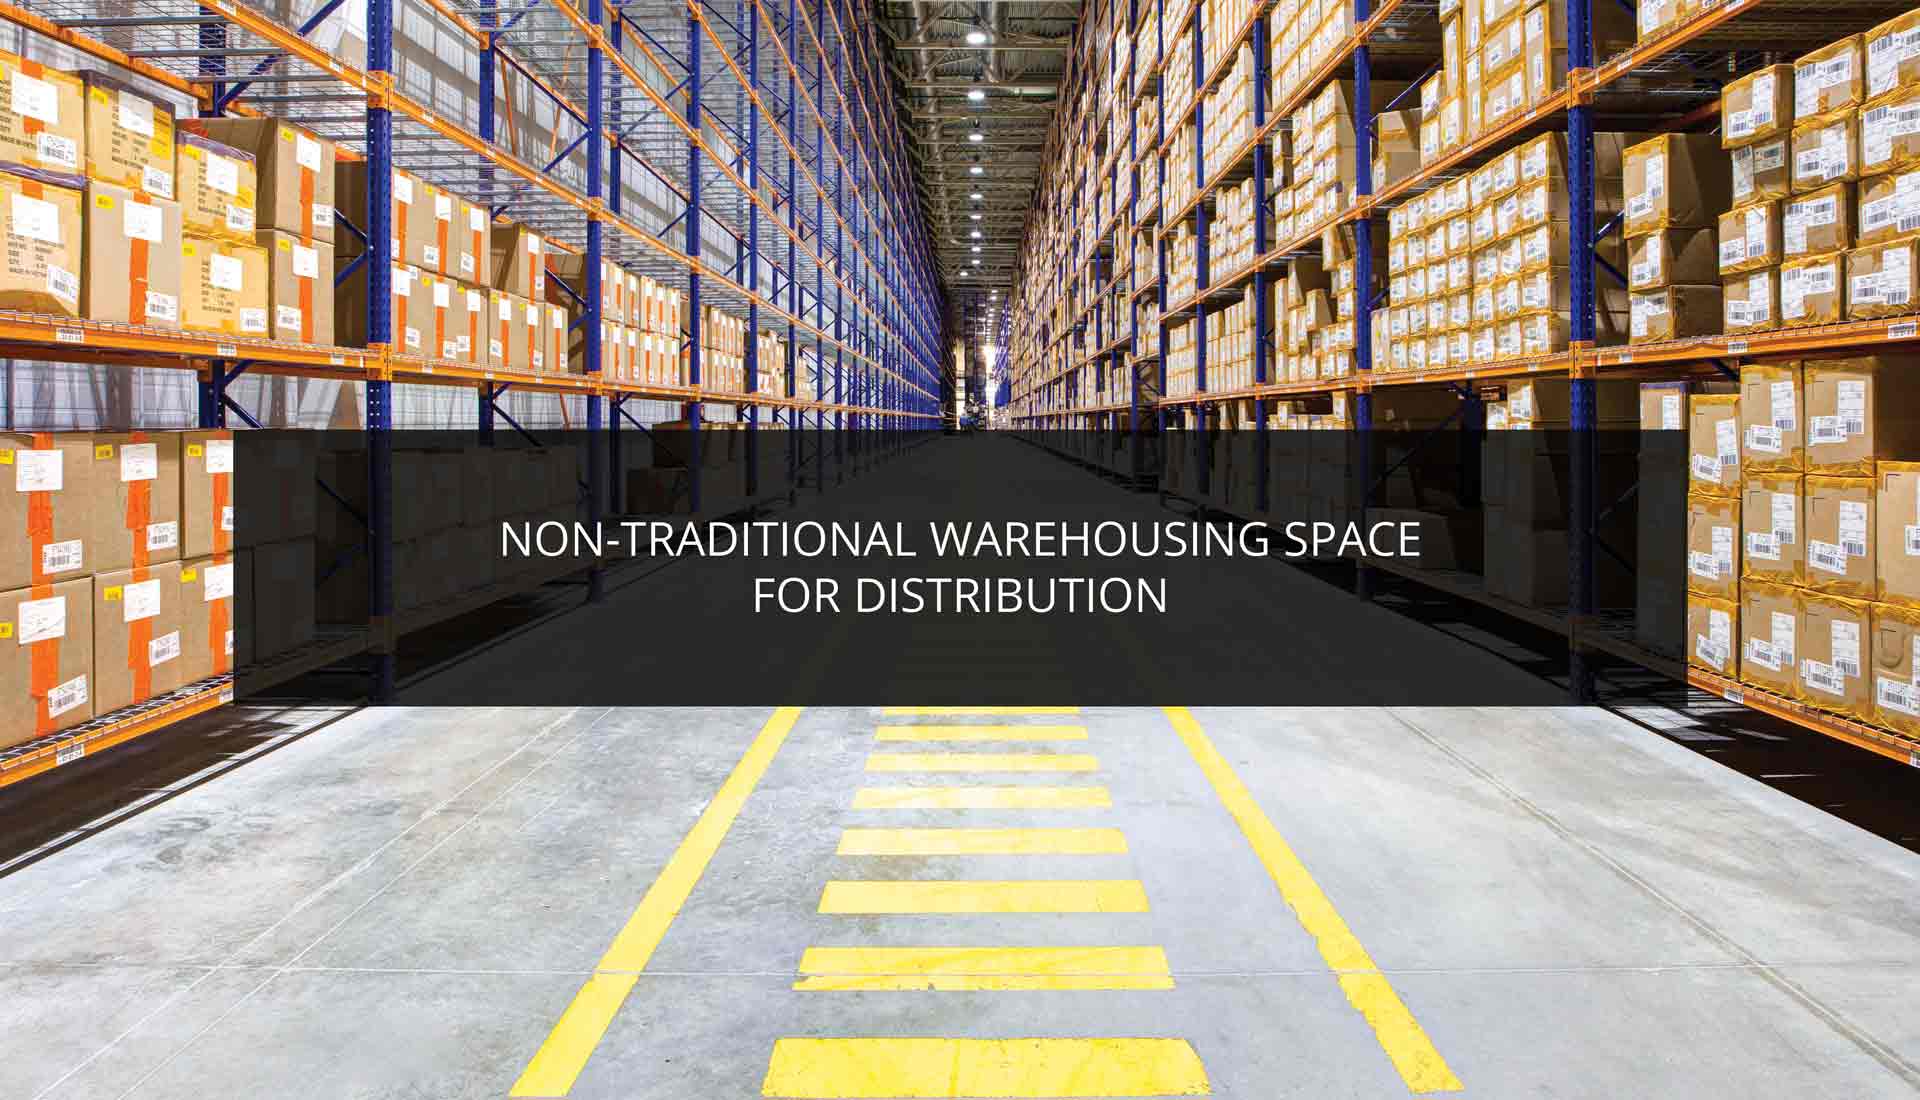 Non-Traditional Warehousing Space for Distribution